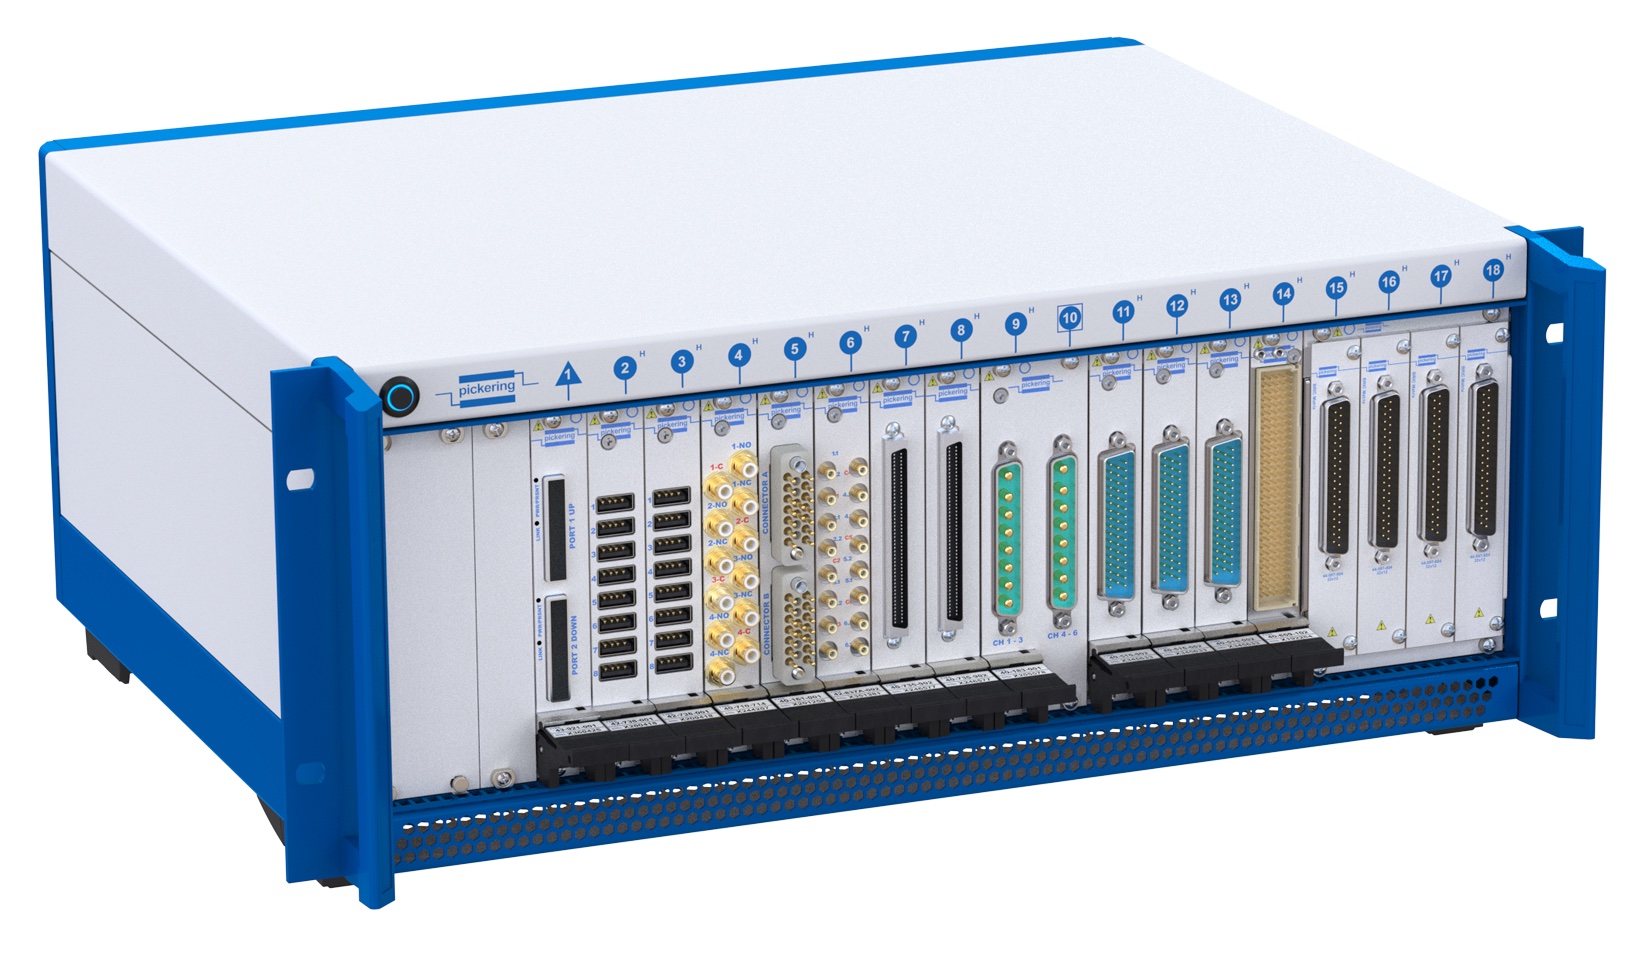 PXIe Chassis Features high Cooling and Power per Slot and Intelligent Monitoring